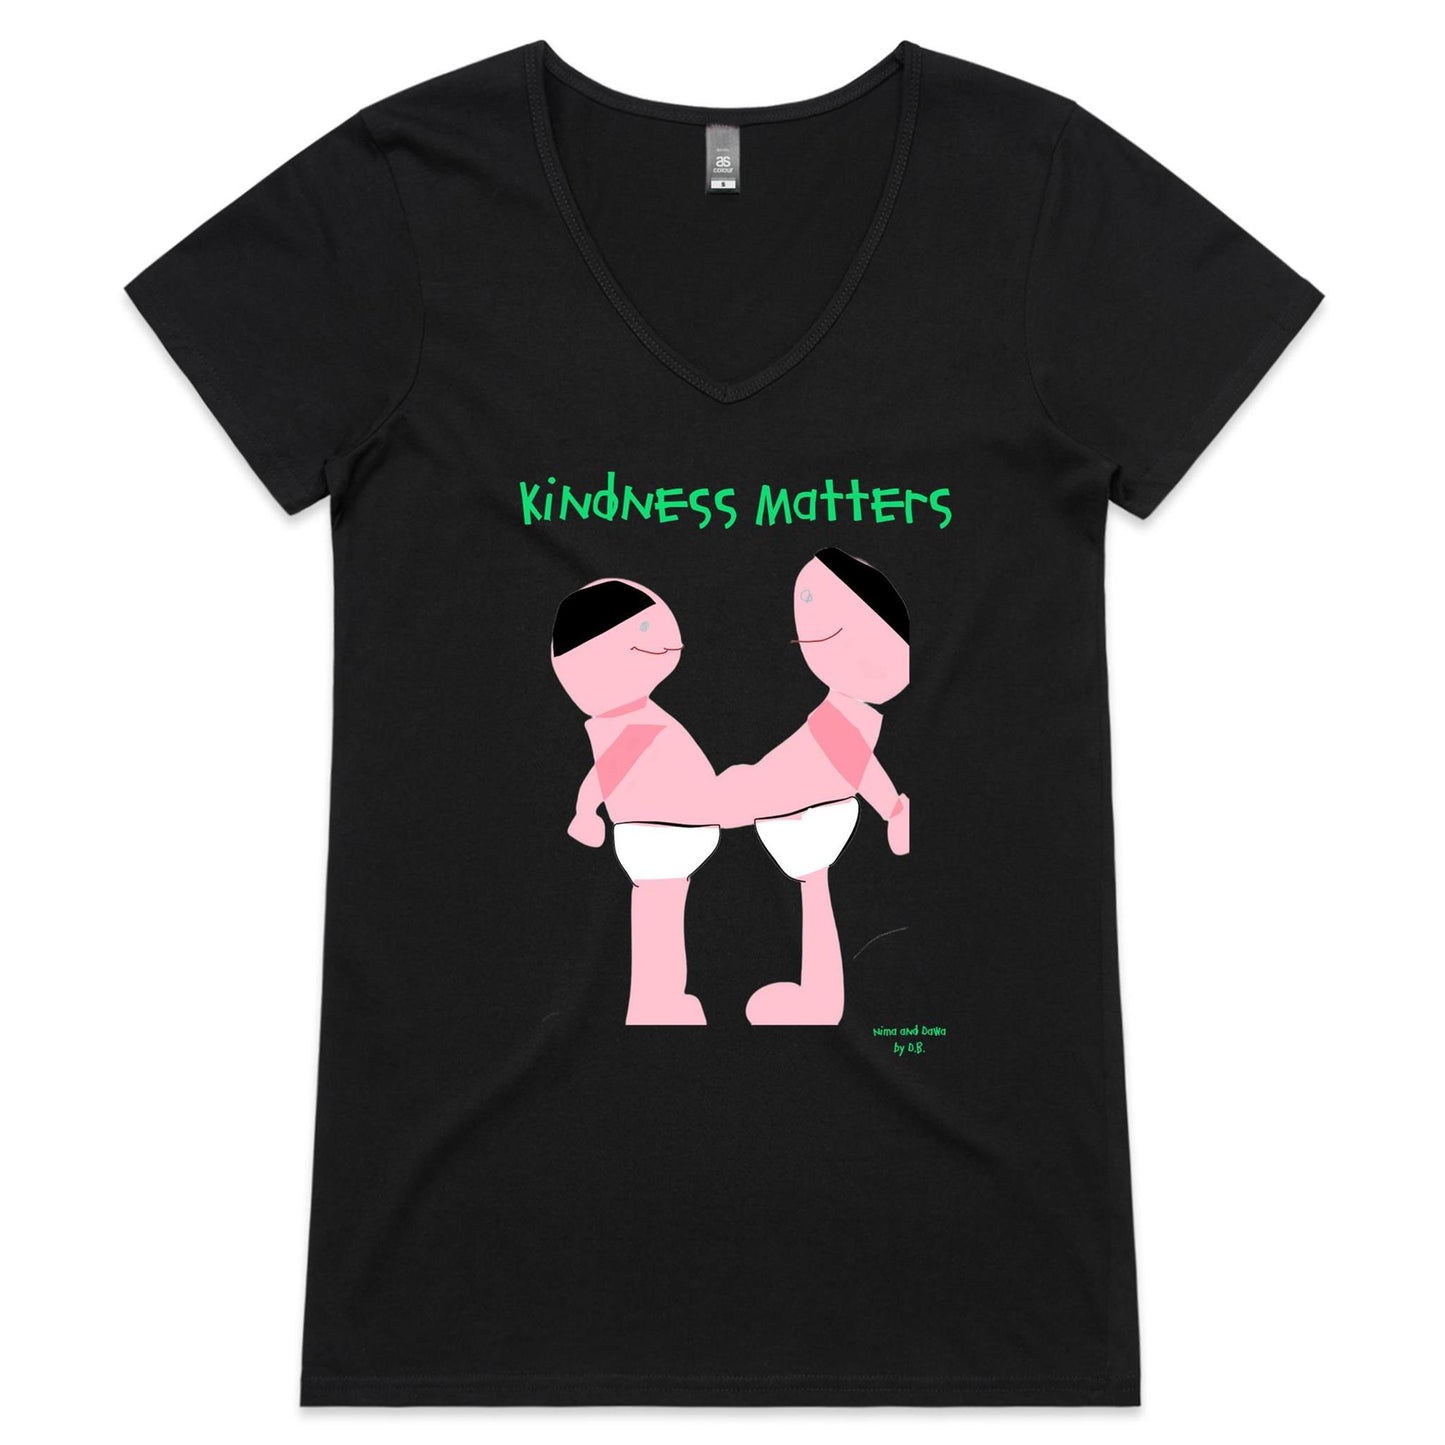 Kindness Matters Womens V-Neck T-Shirt with Nima and Dawa print by D.B. - printed front and back